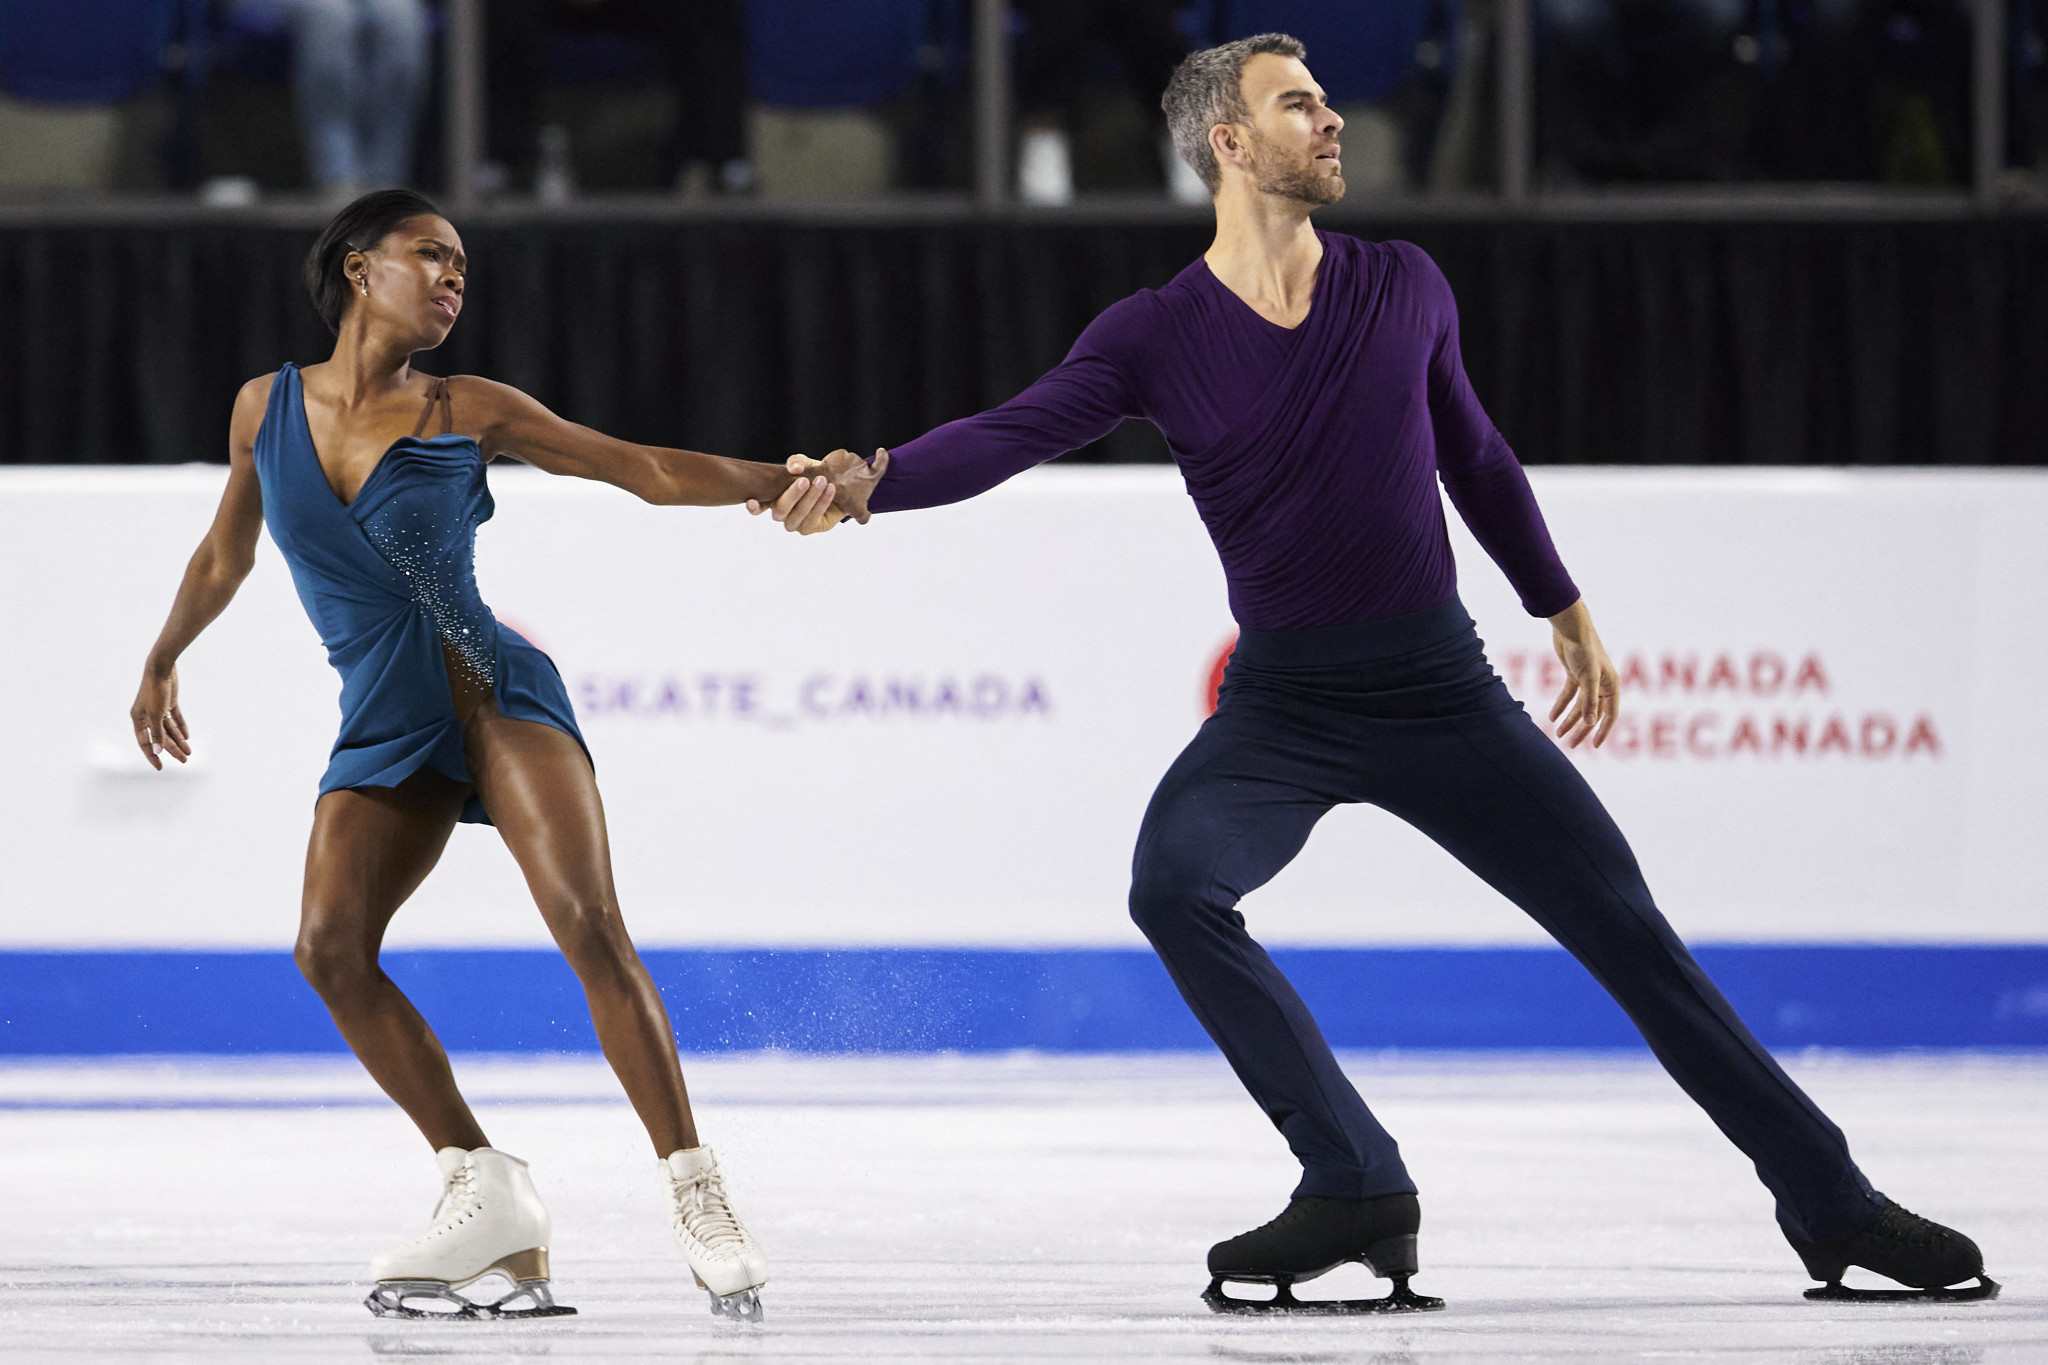 Canada seeking defence of team title at Beijing 2022 in figure skating